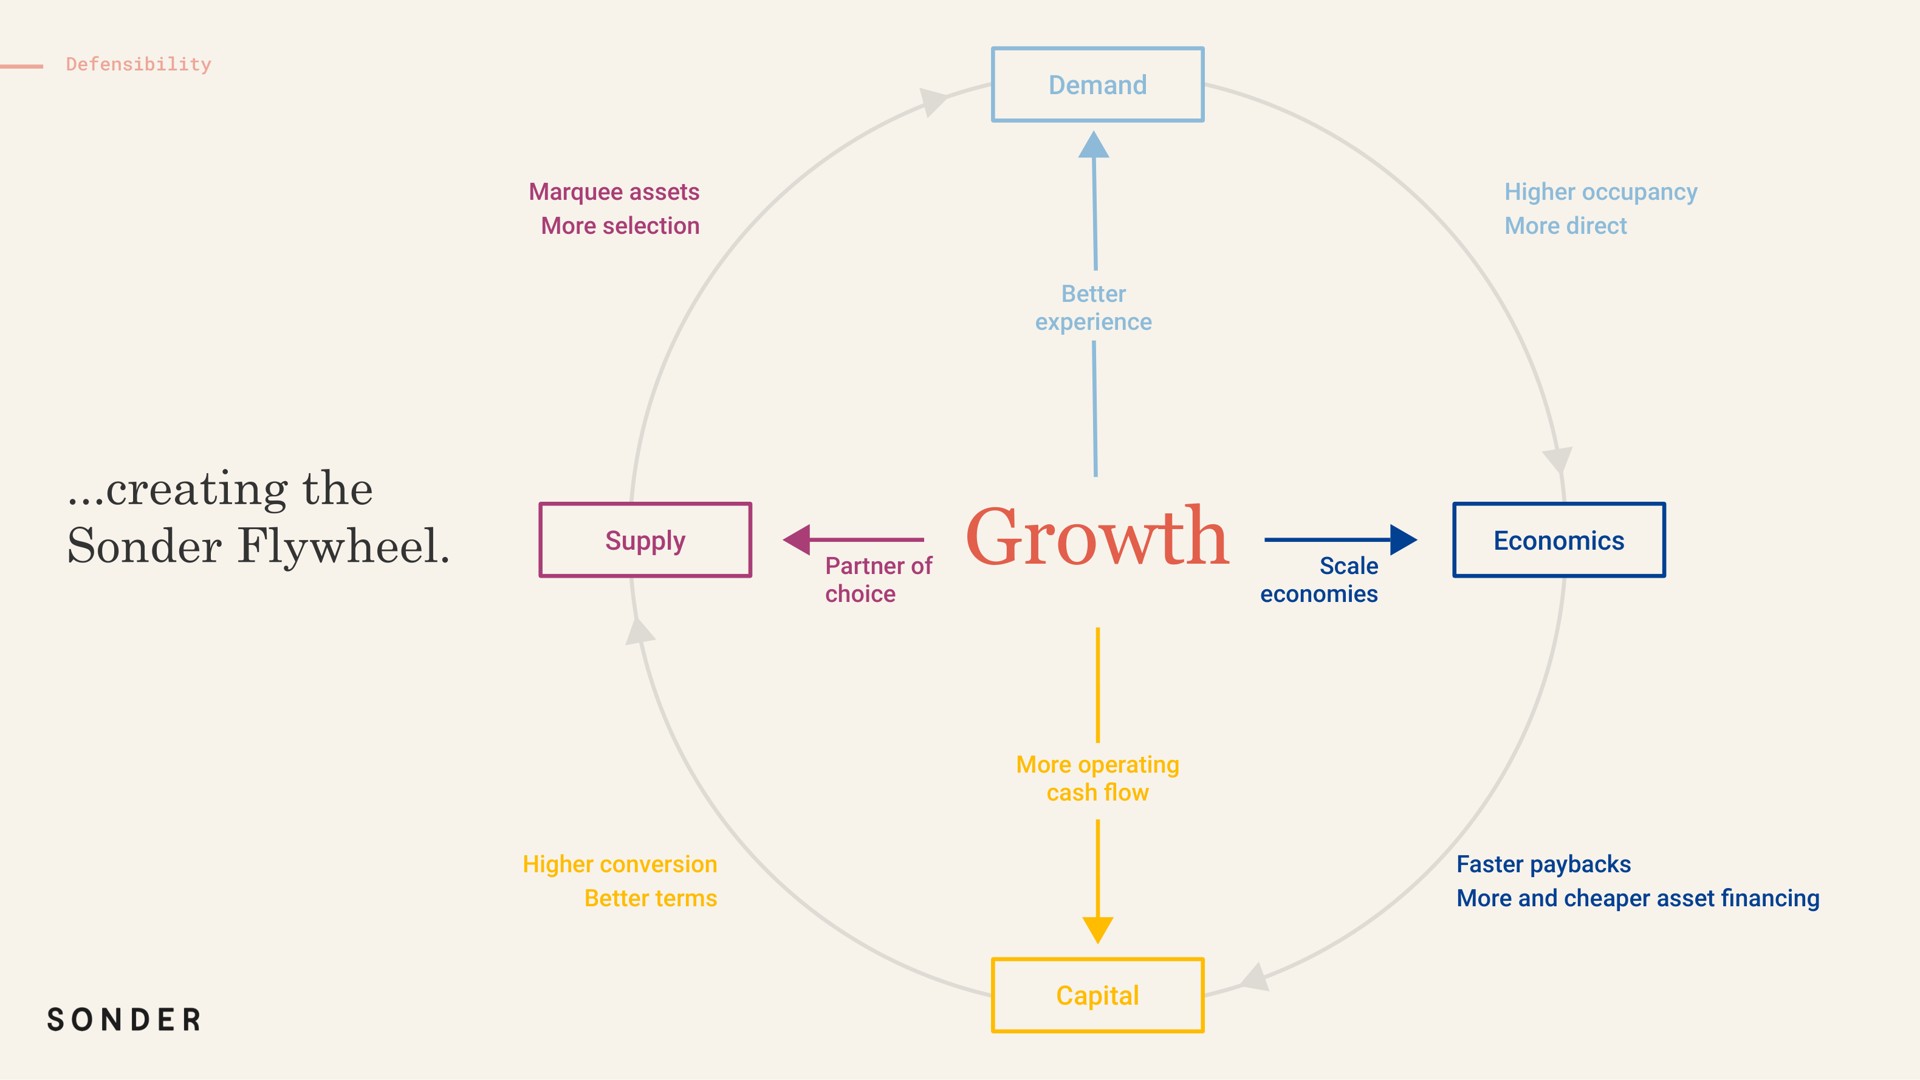 marquee assets more selection demand better experience higher occupancy more direct supply growth partner of choice scale economies economics higher conversion better terms more operating cash capital faster more and asset creating the flywheel | Sonder